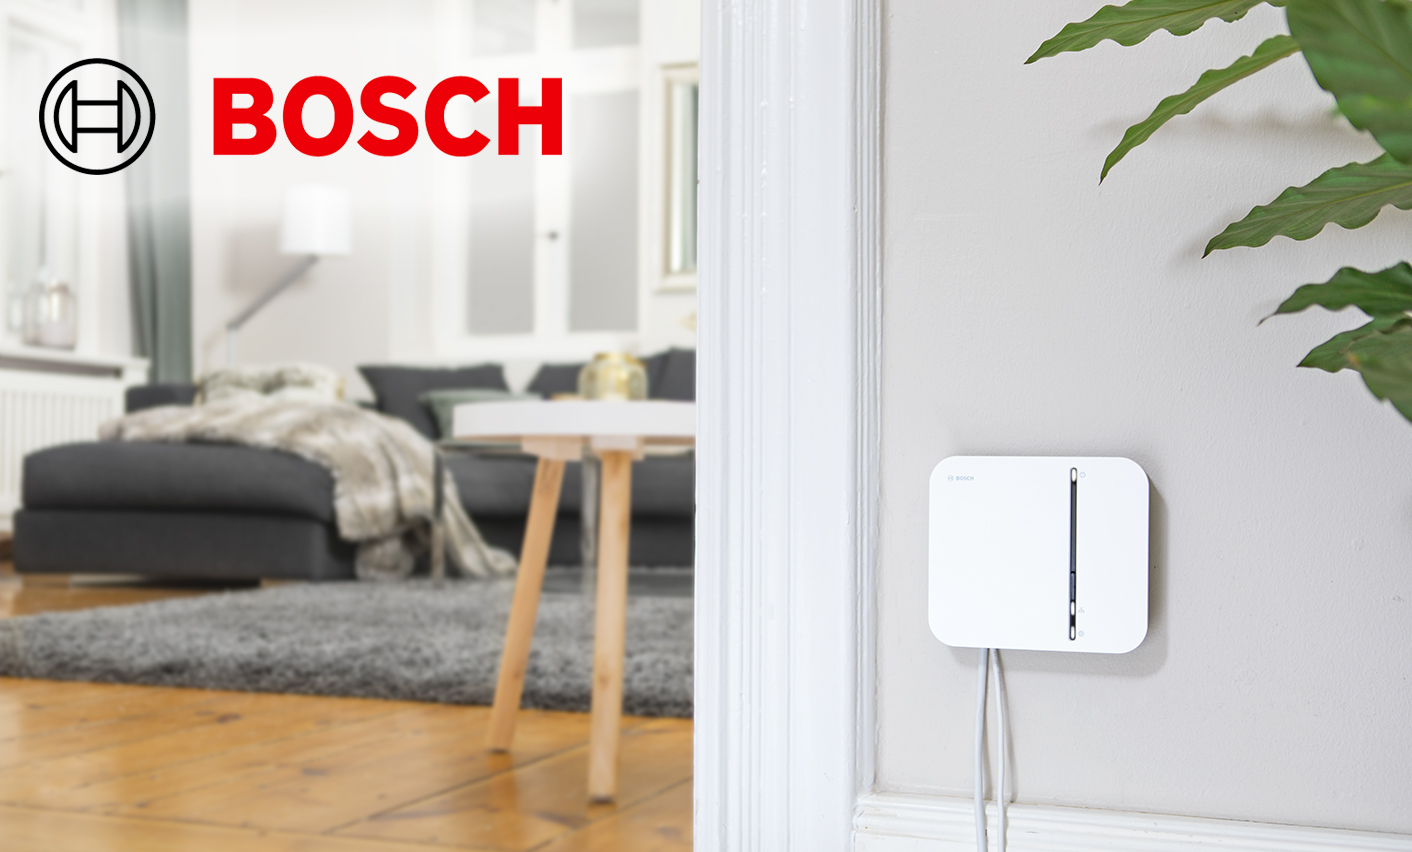 Proved security for a smart home: Re-certification of the Bosch